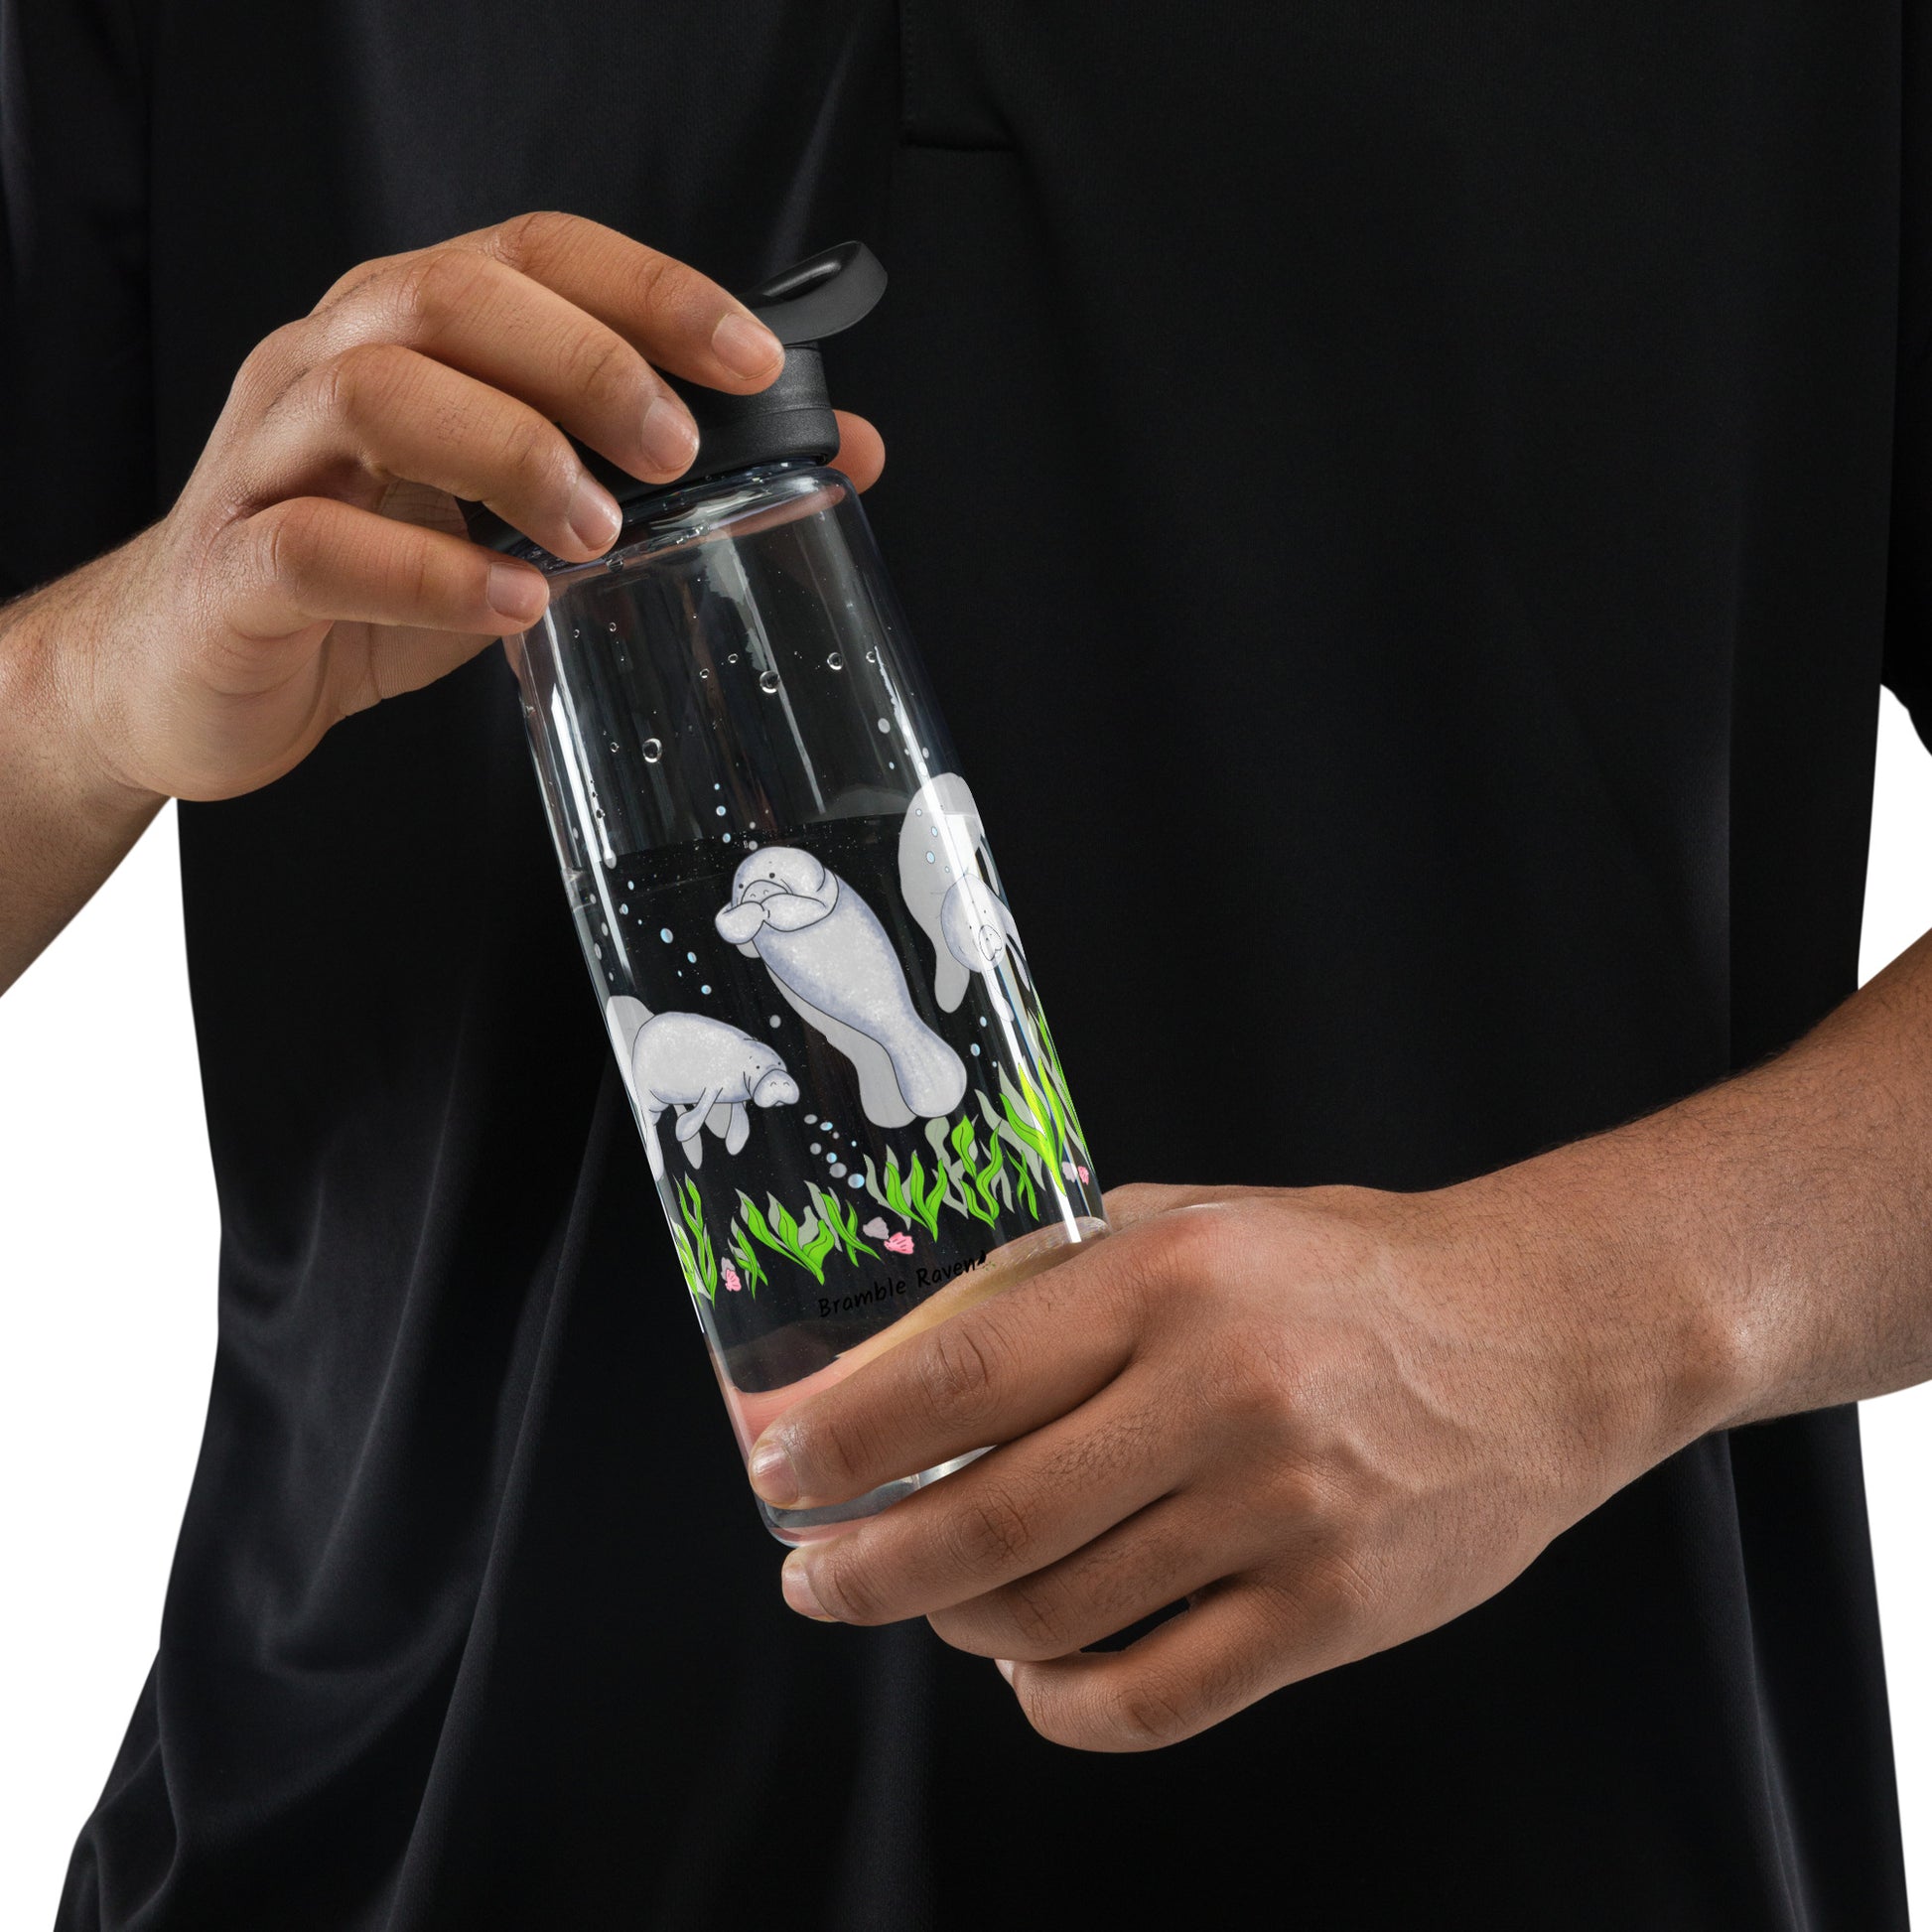 25 ounce sports water bottle with spill proof lid and bite valve. Clear stain and odor-resistant BPA-free plastic with manatee designs around the bottle, swimming above the seaweed and shells. Shown in model's hands.